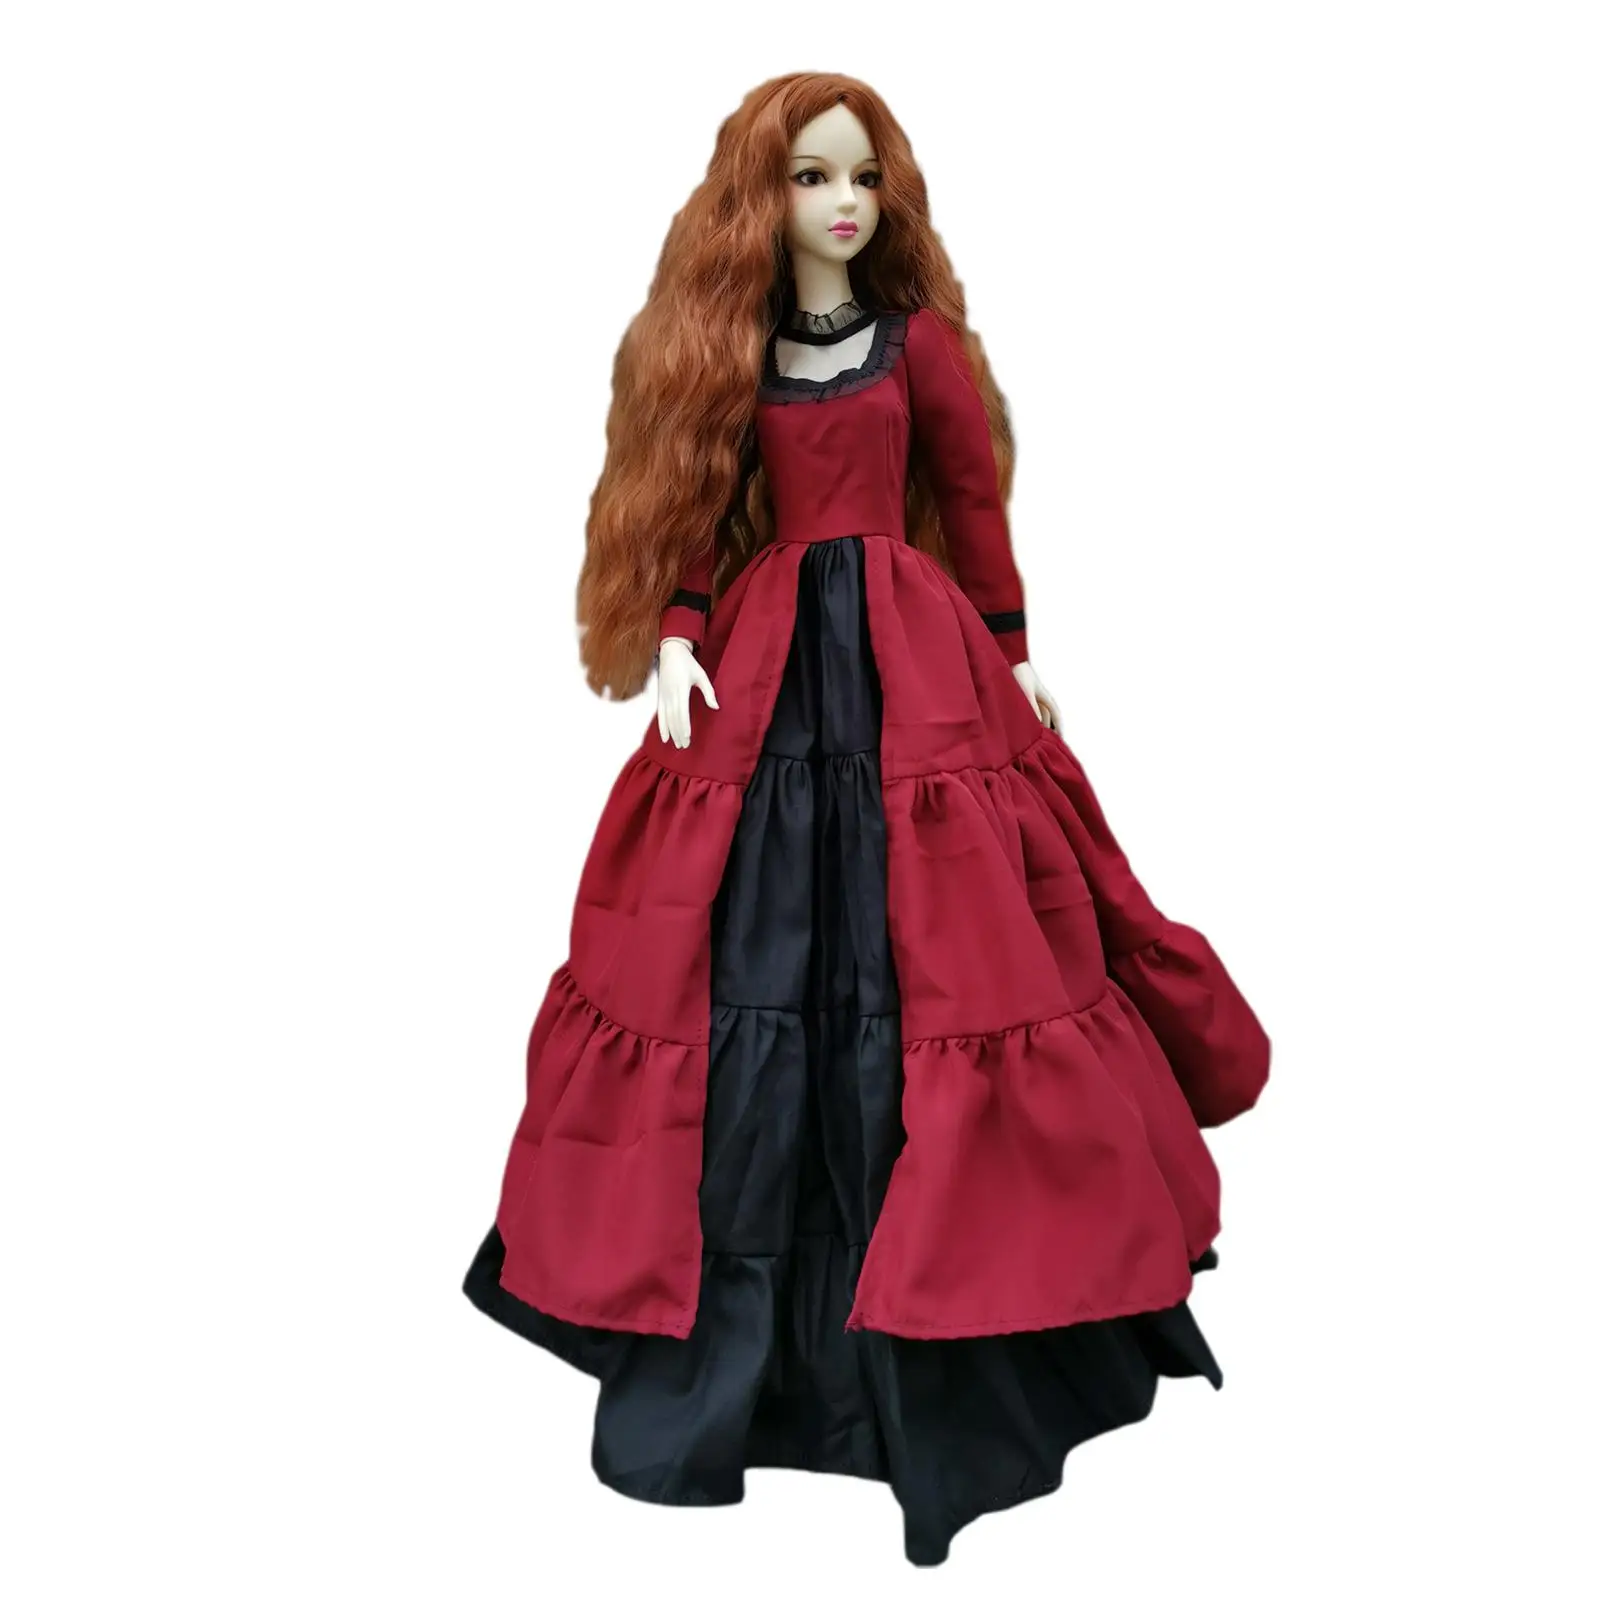 Ball Jointed Doll 1/3 Dolls with Beautiful Doll Clothes , Action Figures for Gifts